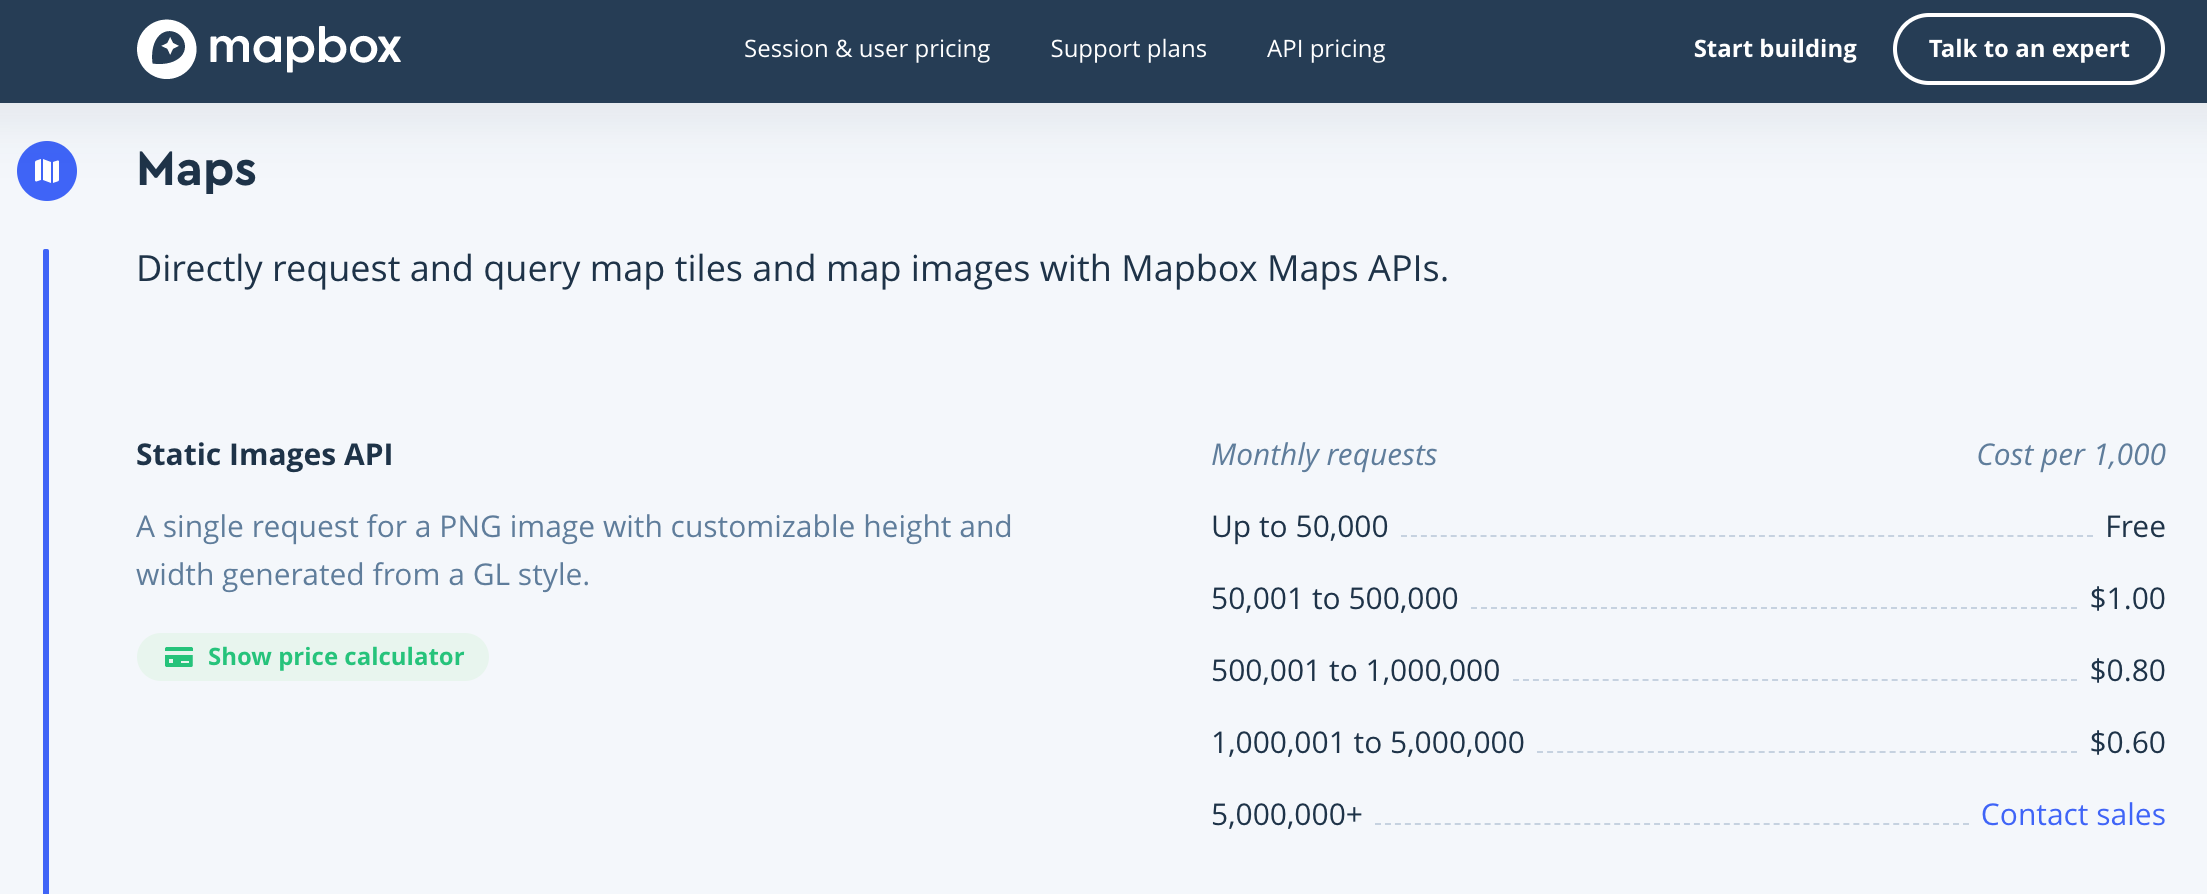 mapbox-pricing.png